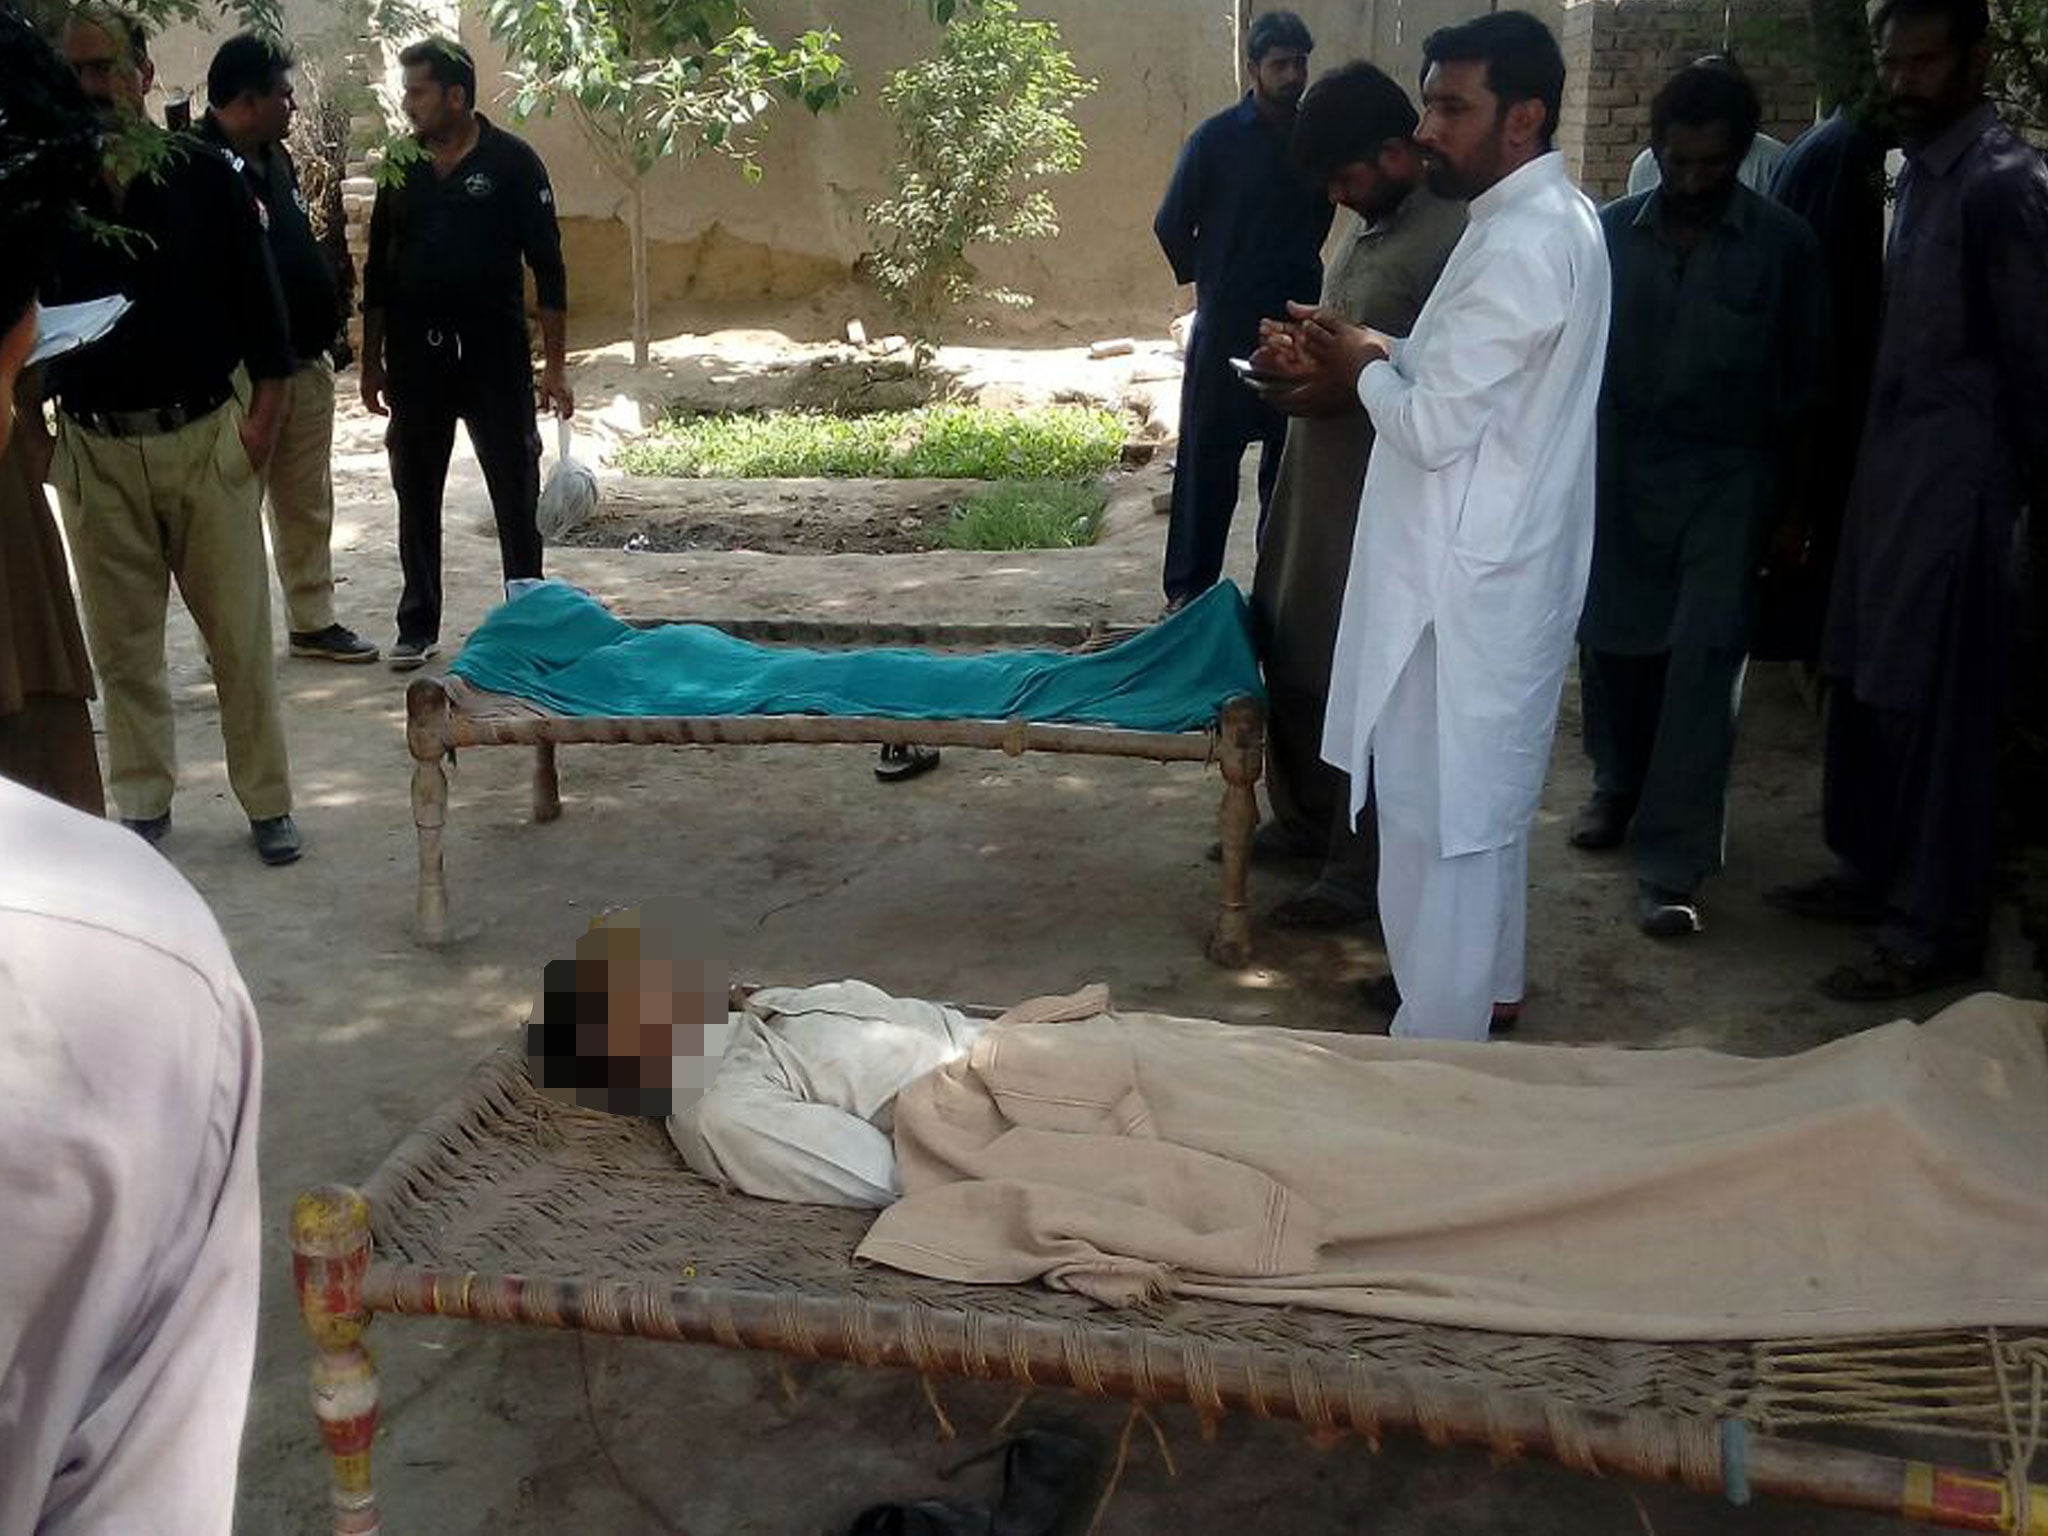 Pakistani police officials stand around the bodies of a woman and her alleged boyfriend who were hanged to death by the woman's father, brother and husband in the village of Chak 56, around 55 kilometres northeast of the central city of Multan, 15 September, 2016